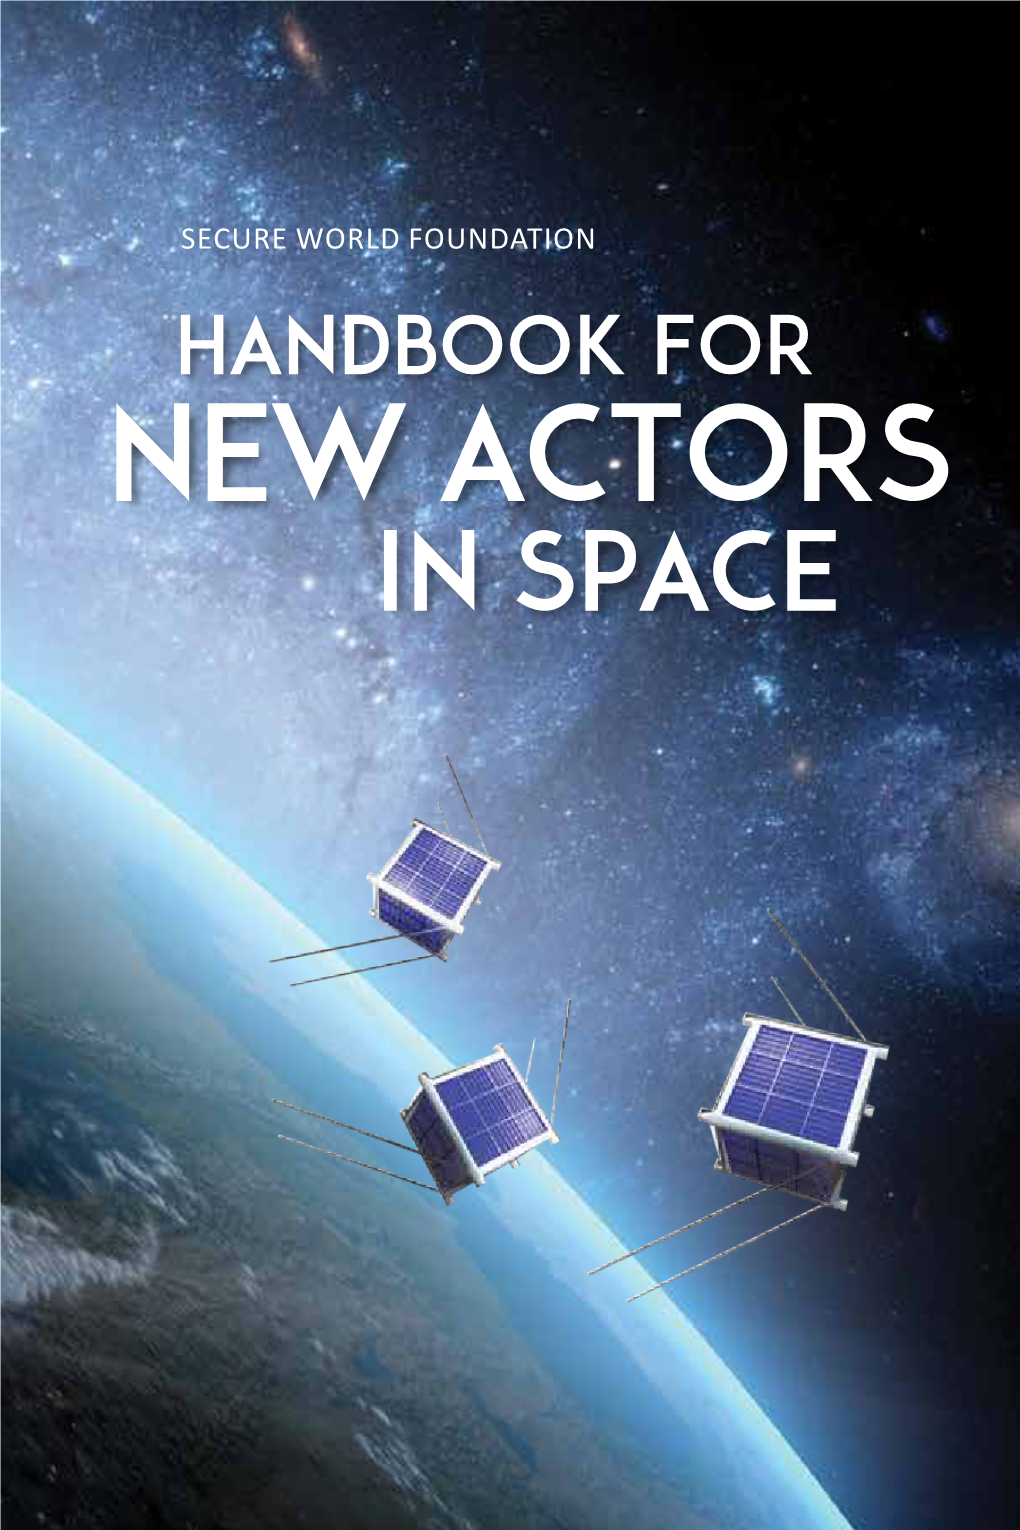 Secure World Foundation: Handbook for New Actors in Space